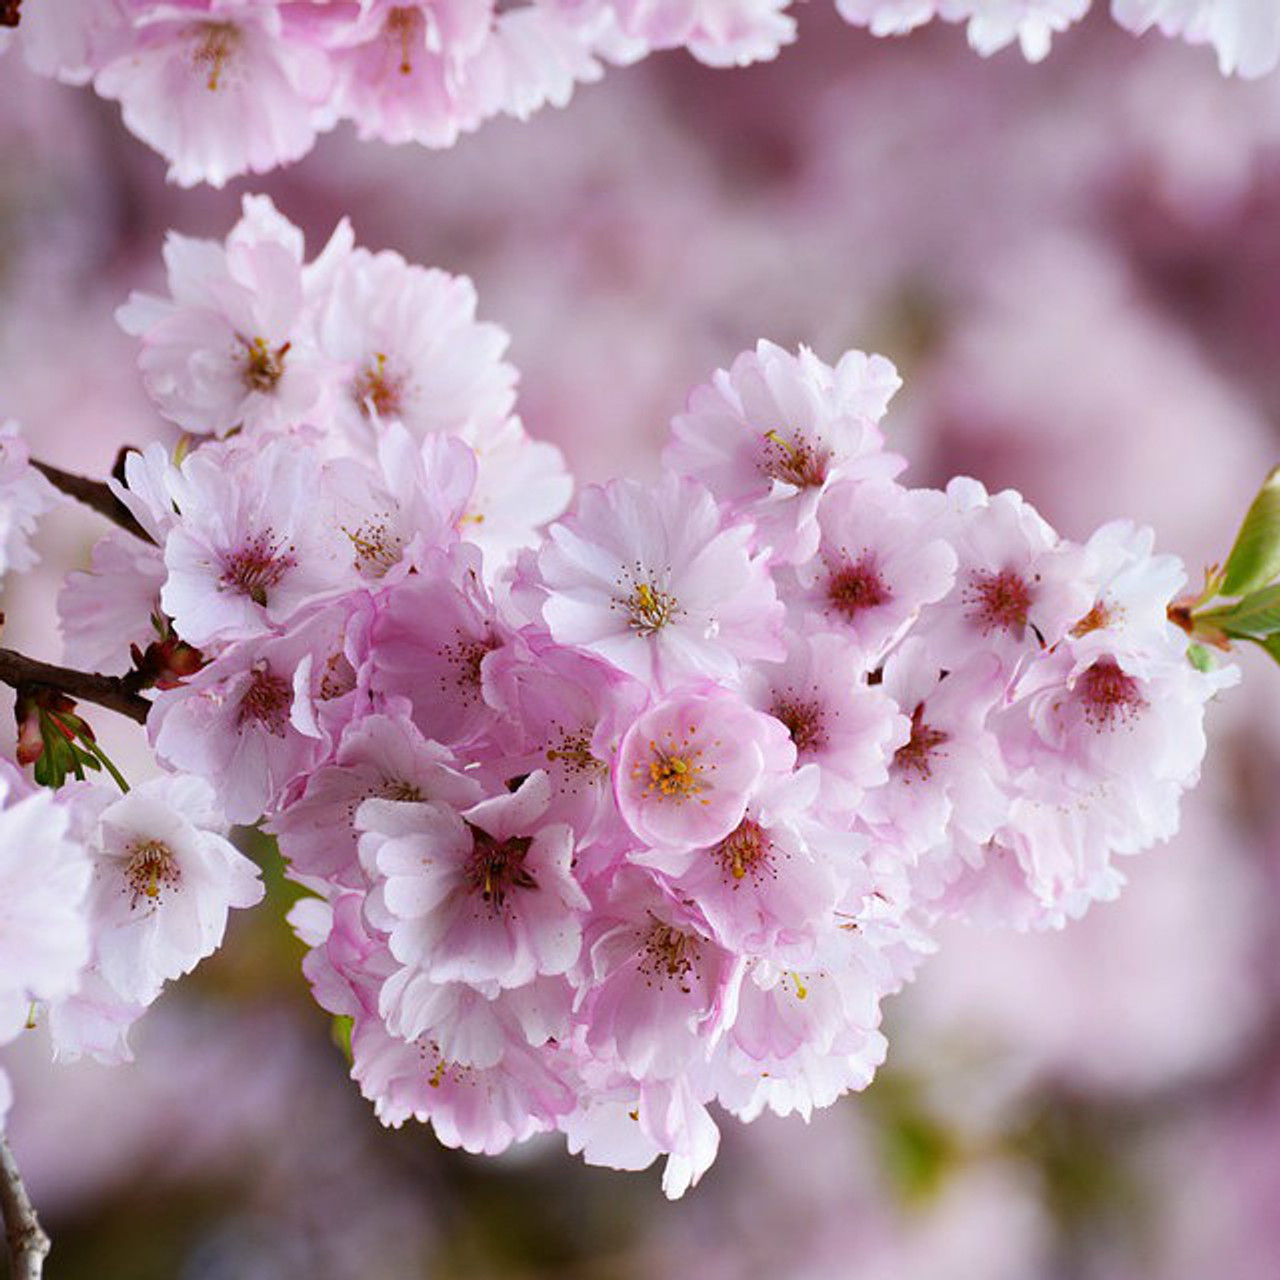 Wholesale Japanese Cherry Blossom BBW Fragrance Oil for your store